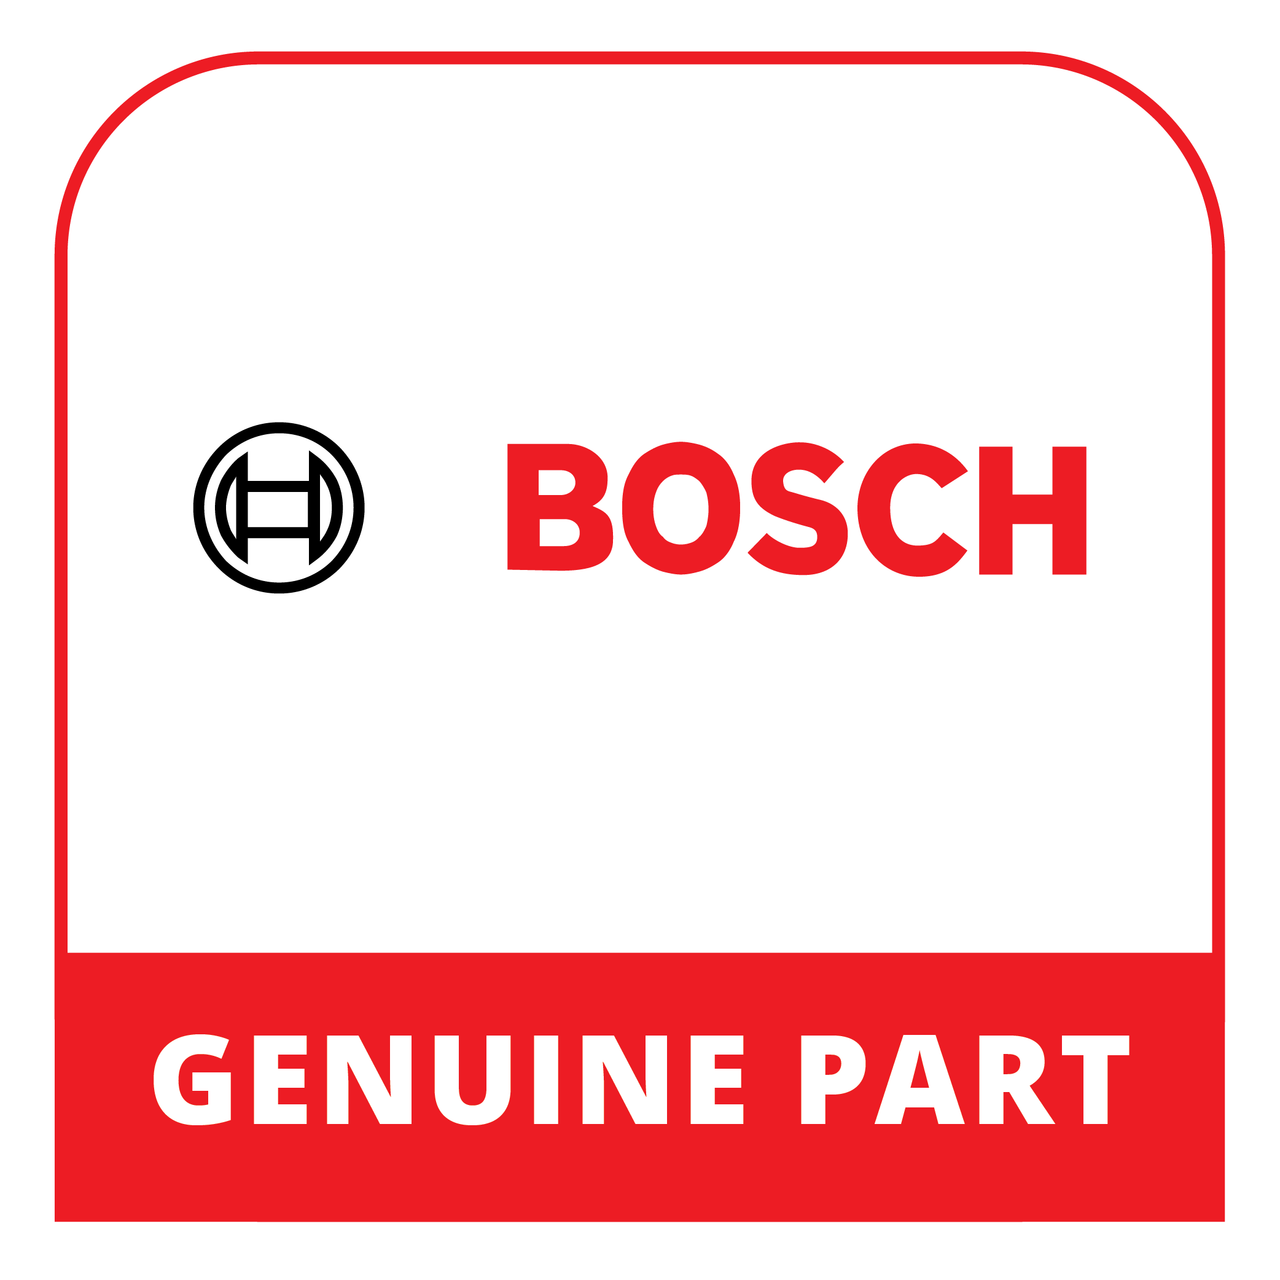 Bosch (Thermador) 12029701 - Operating Module Not Programmed - Genuine Bosch (Thermador) Part